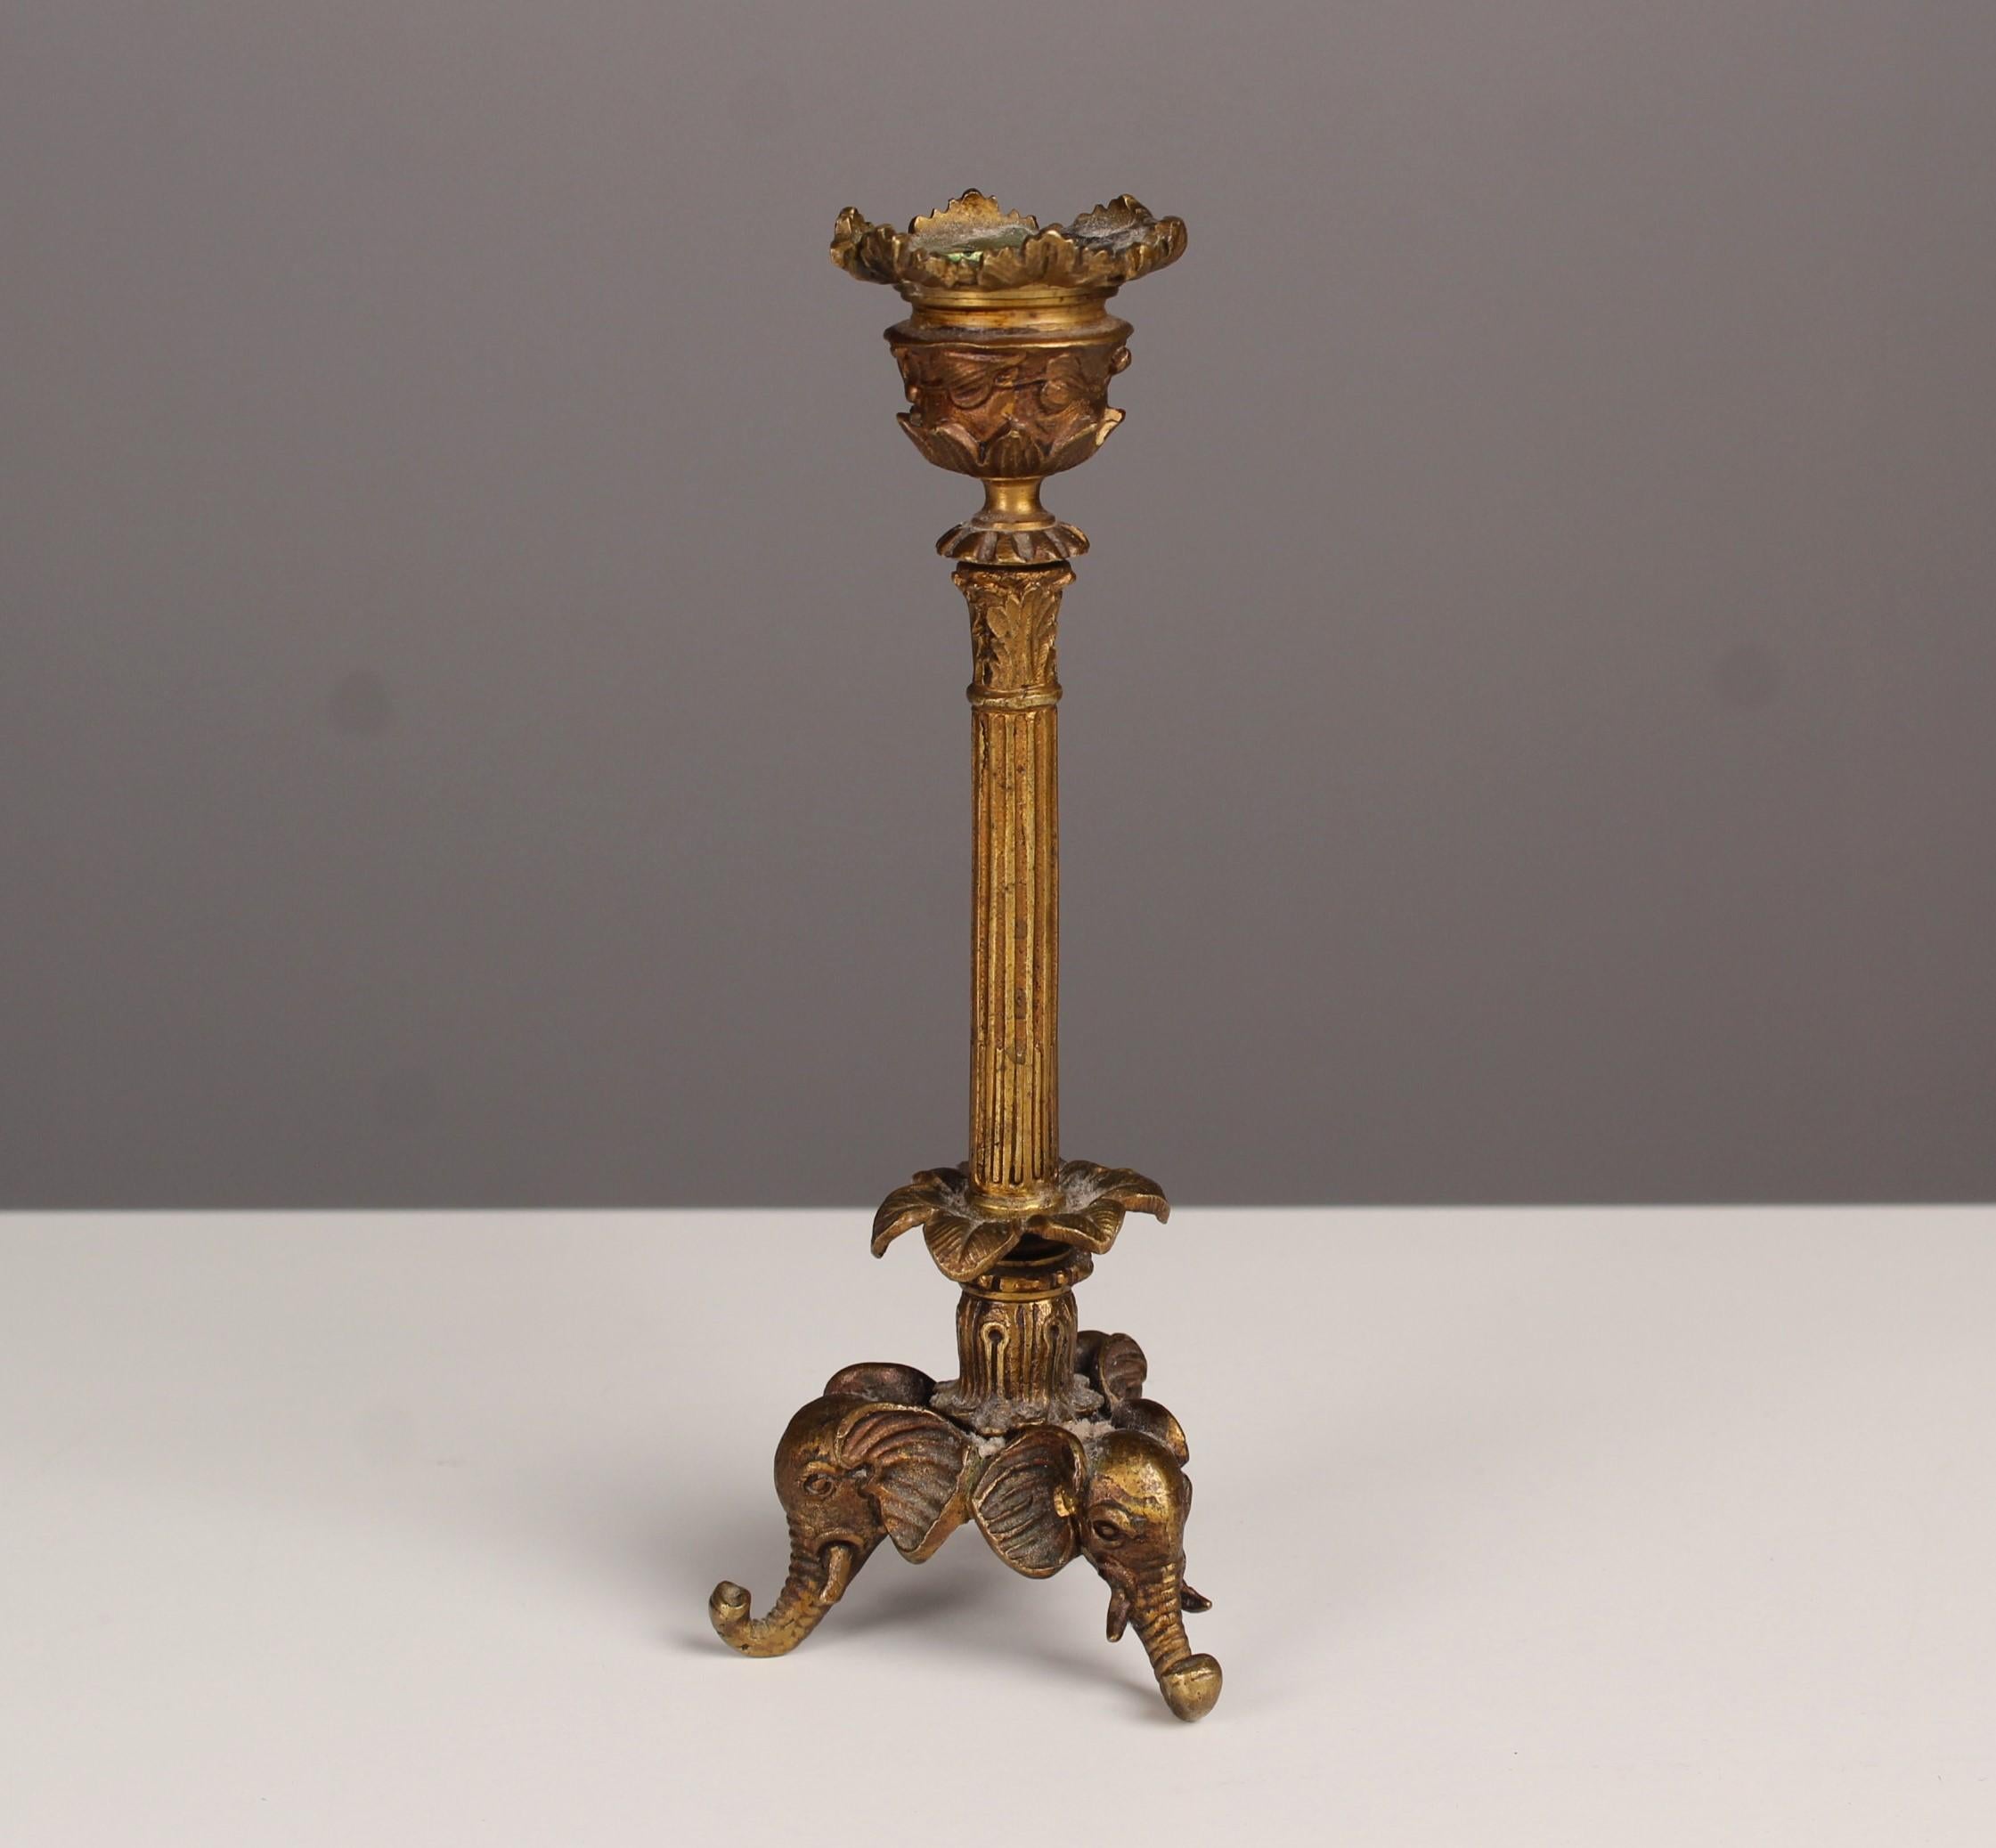 Beautiful antique candlestick with three stands in elephant head shape.
Nicely chiseled bronze work with several different floral ornaments.
Very nice age related condition.



